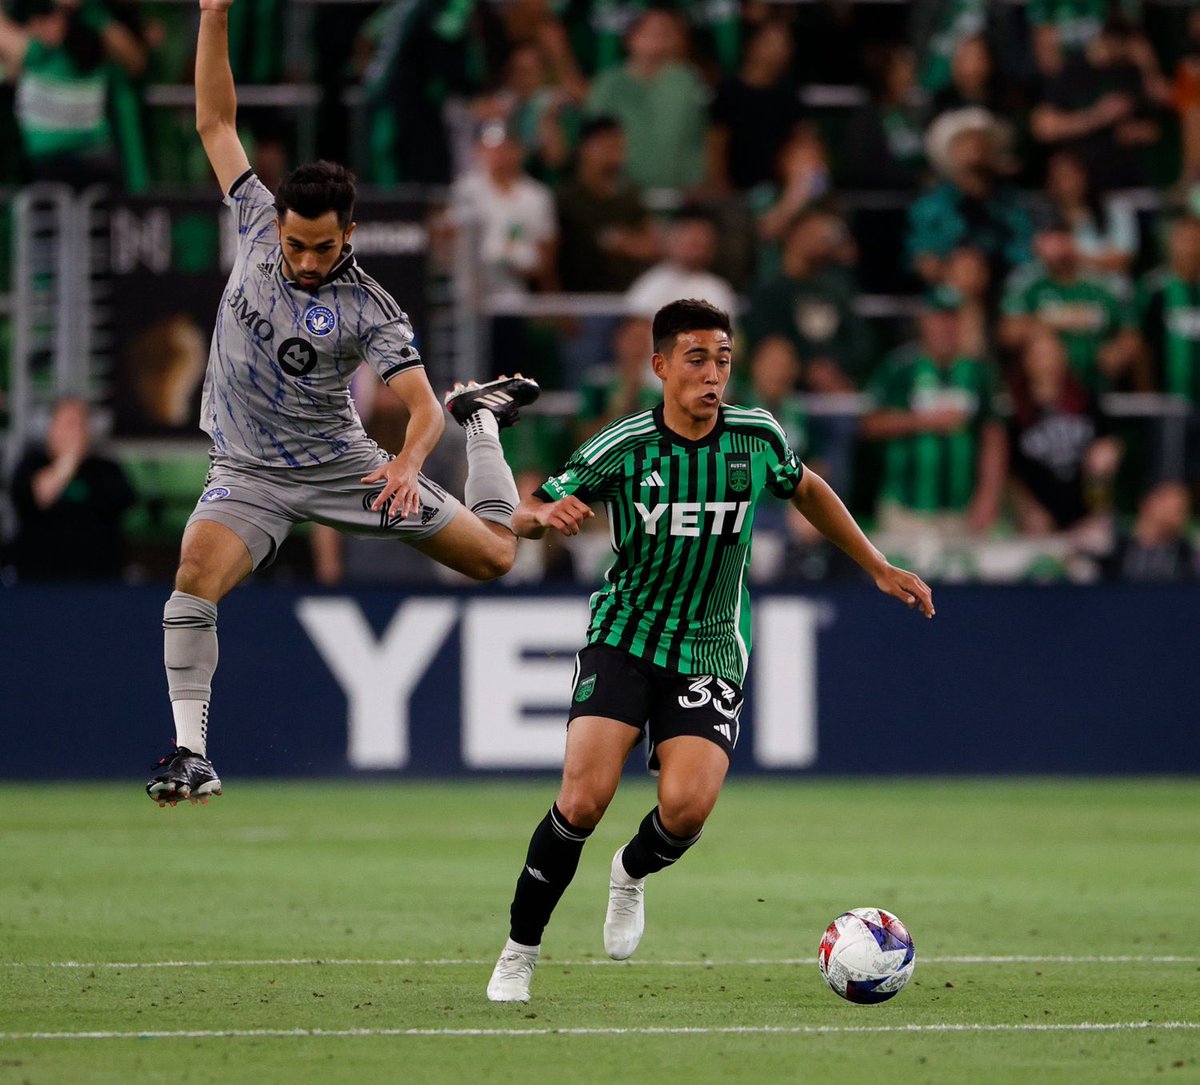 Exposing the myth that owen wolff has been getting nepotism minutes this season 
#AustinFC